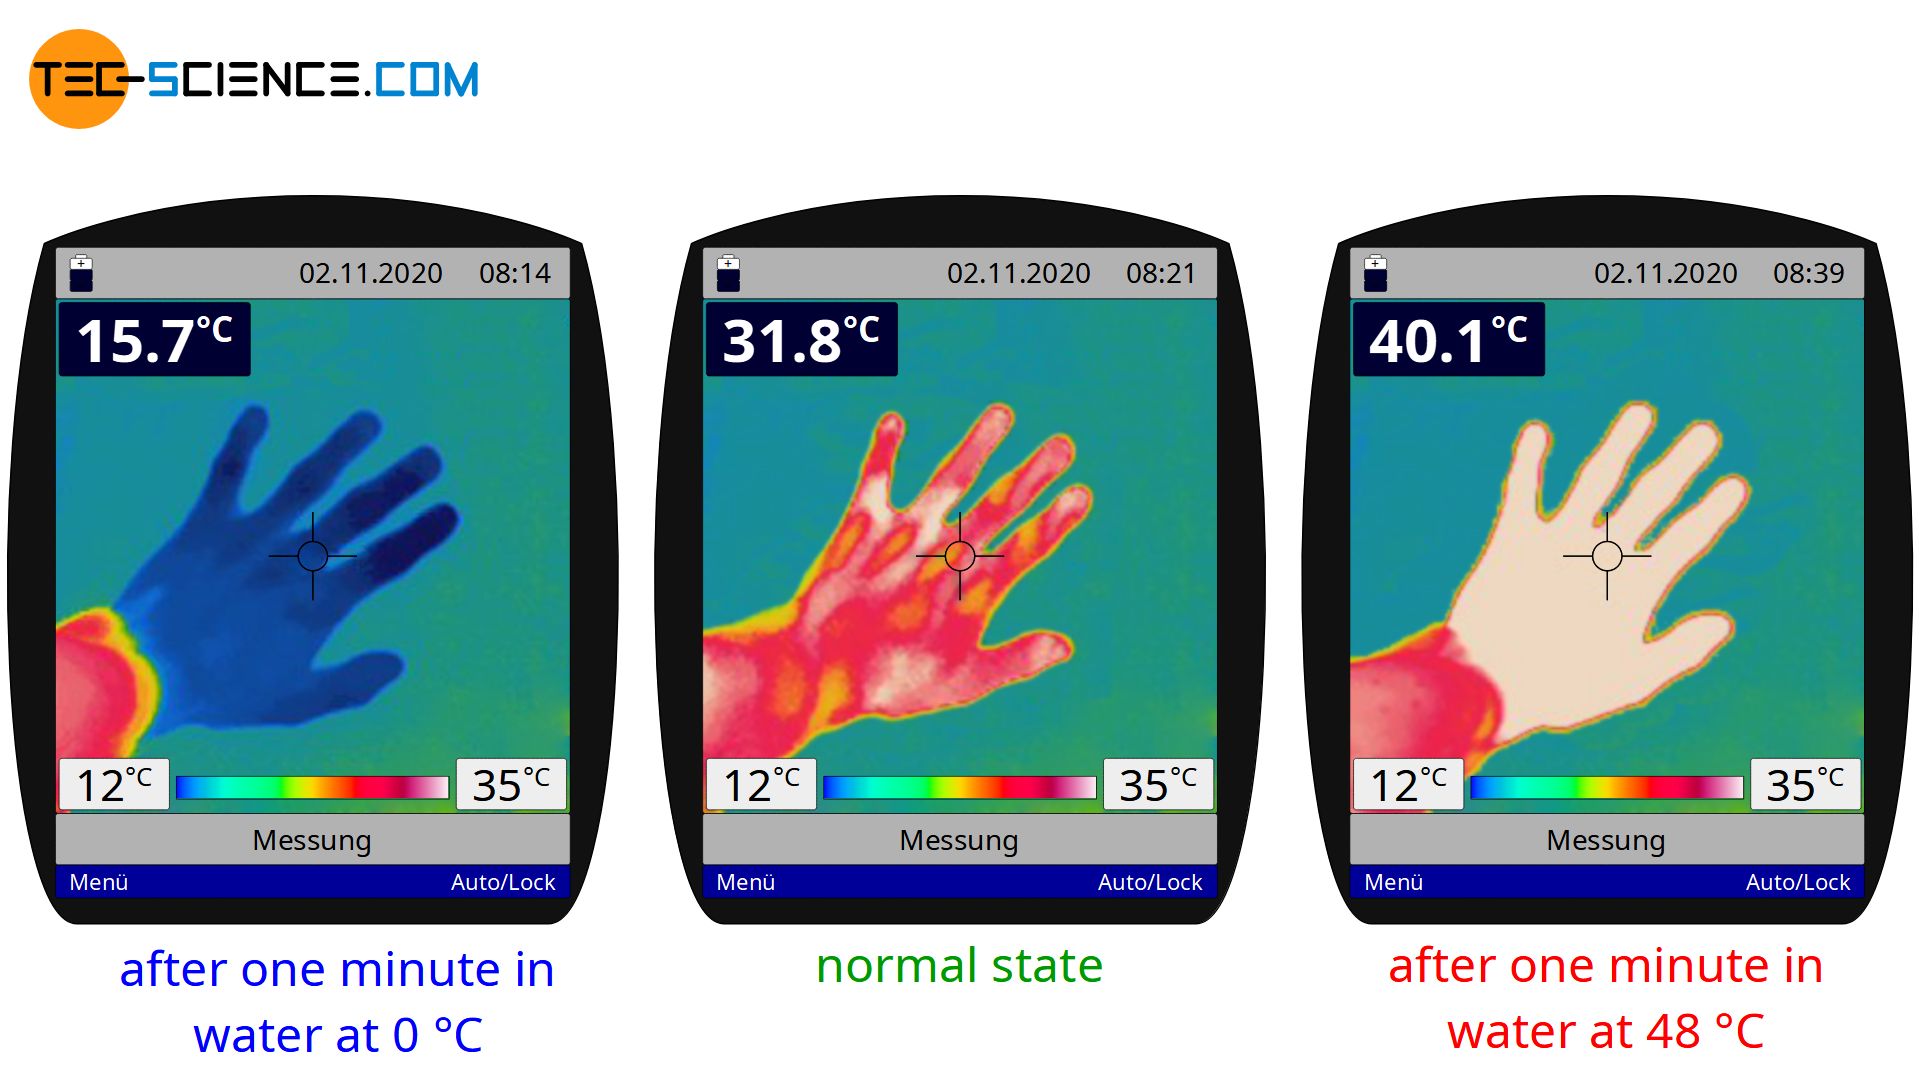 Thermal image of a hand at different temperatures